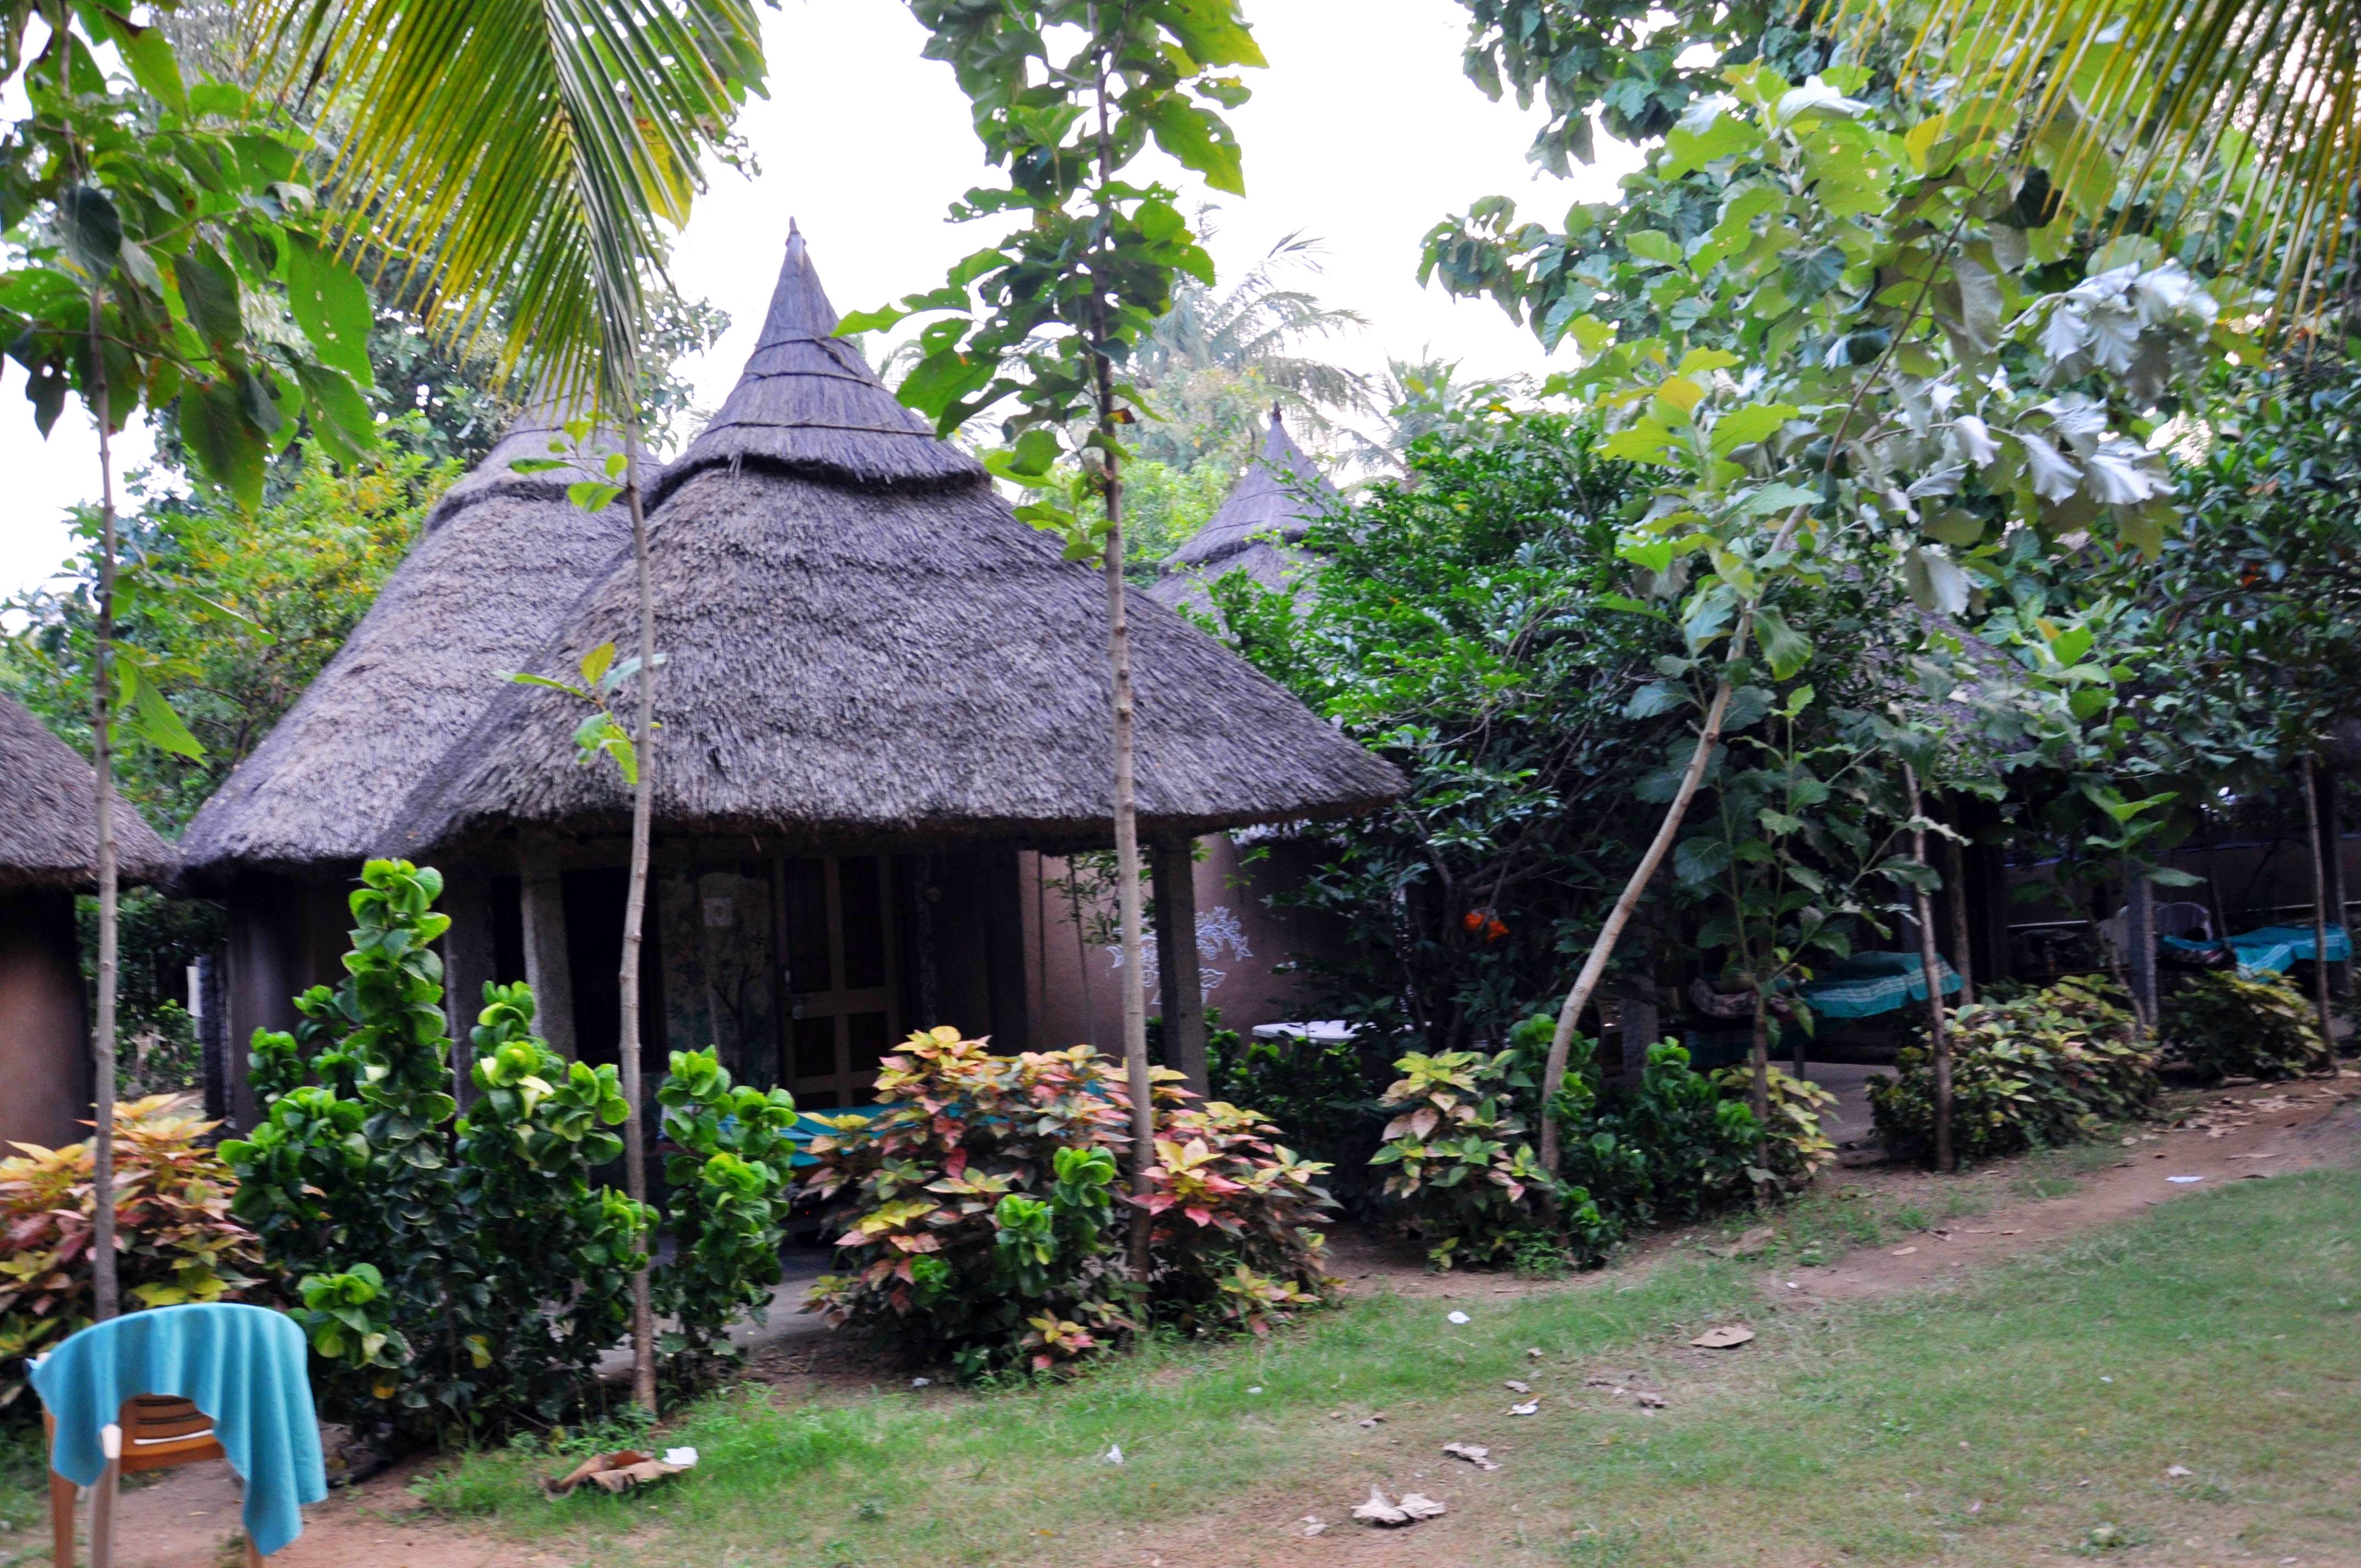 Hut,Thatching,Cottage,Property,Roof,Jungle,House,Building,Shack,Rainforest